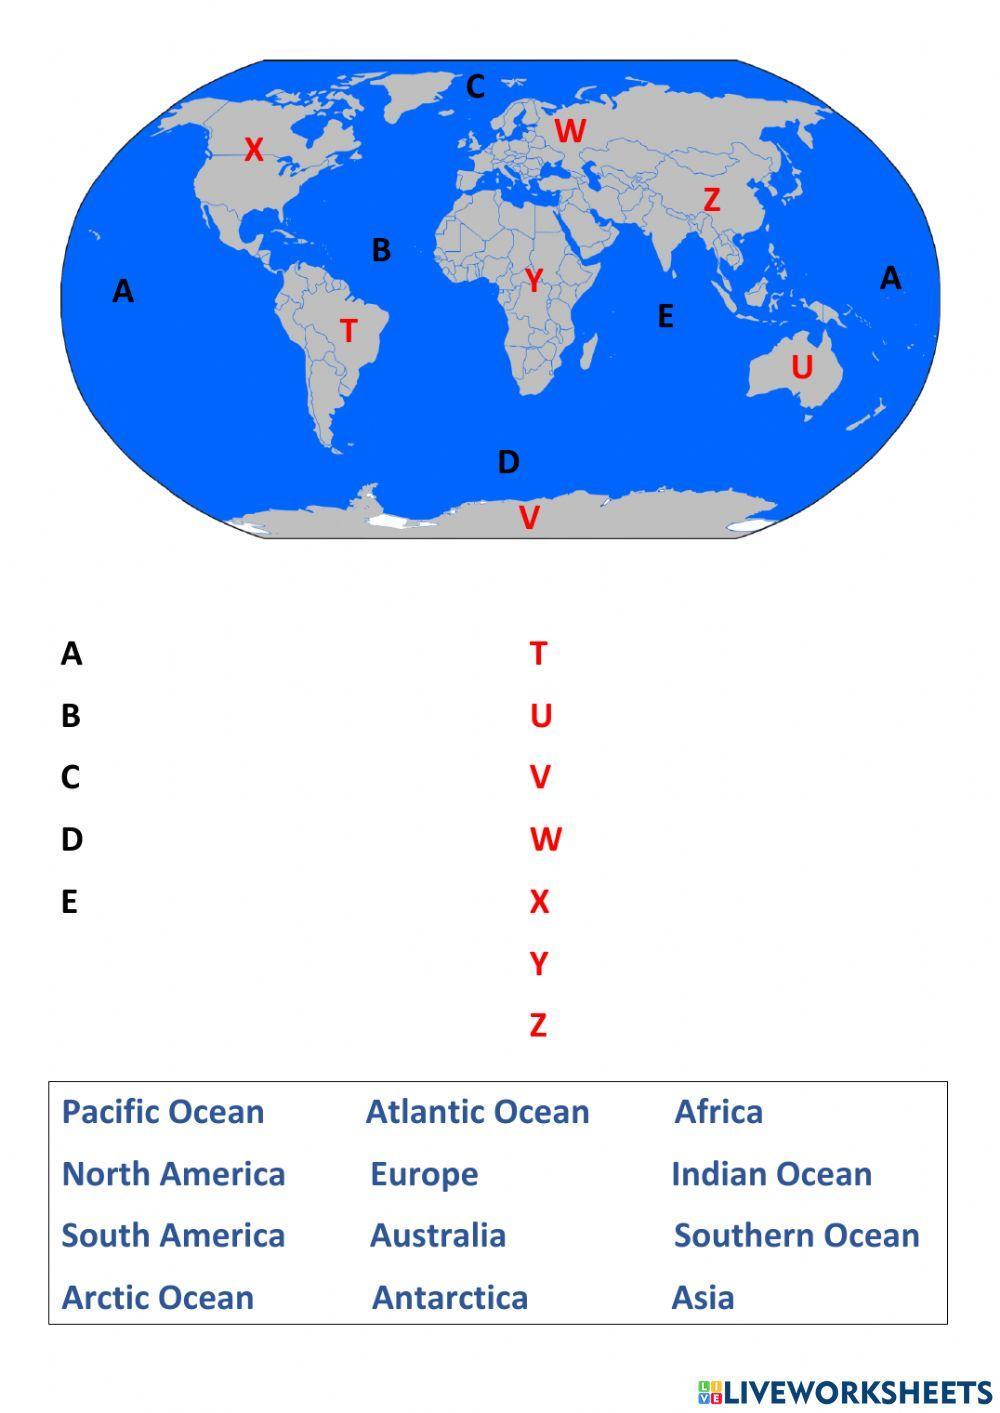 Continents and Oceans Worksheet